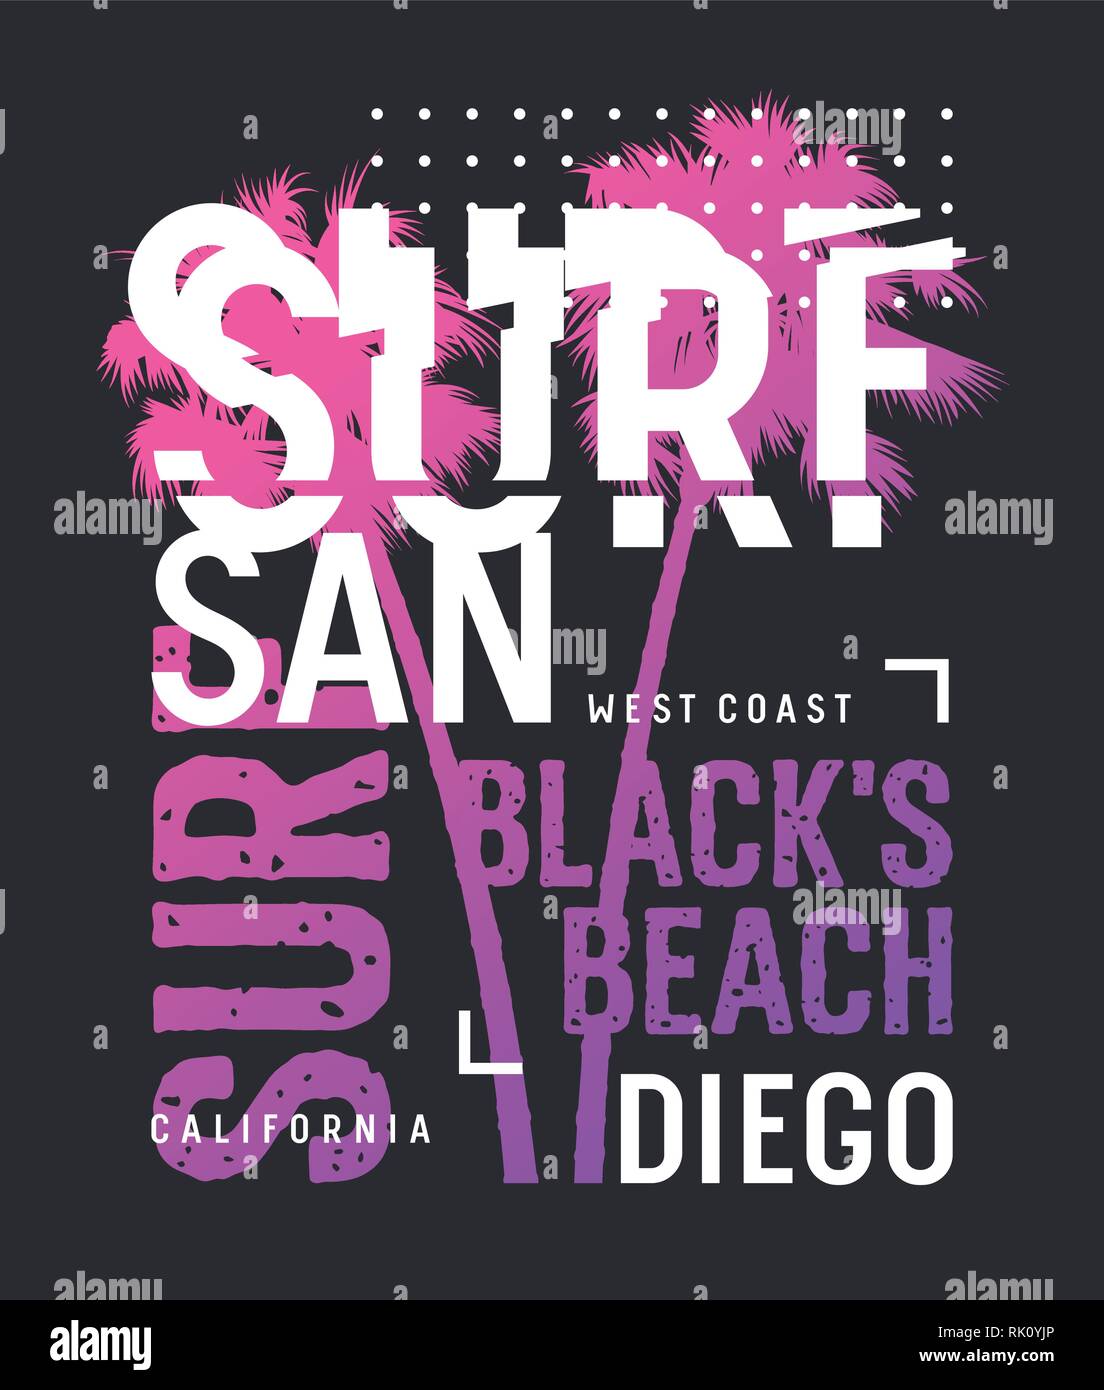 Surf California t-shirt and apparel design. Surfing artwork. Trendy Graphic Tee. Vectors Stock Vector